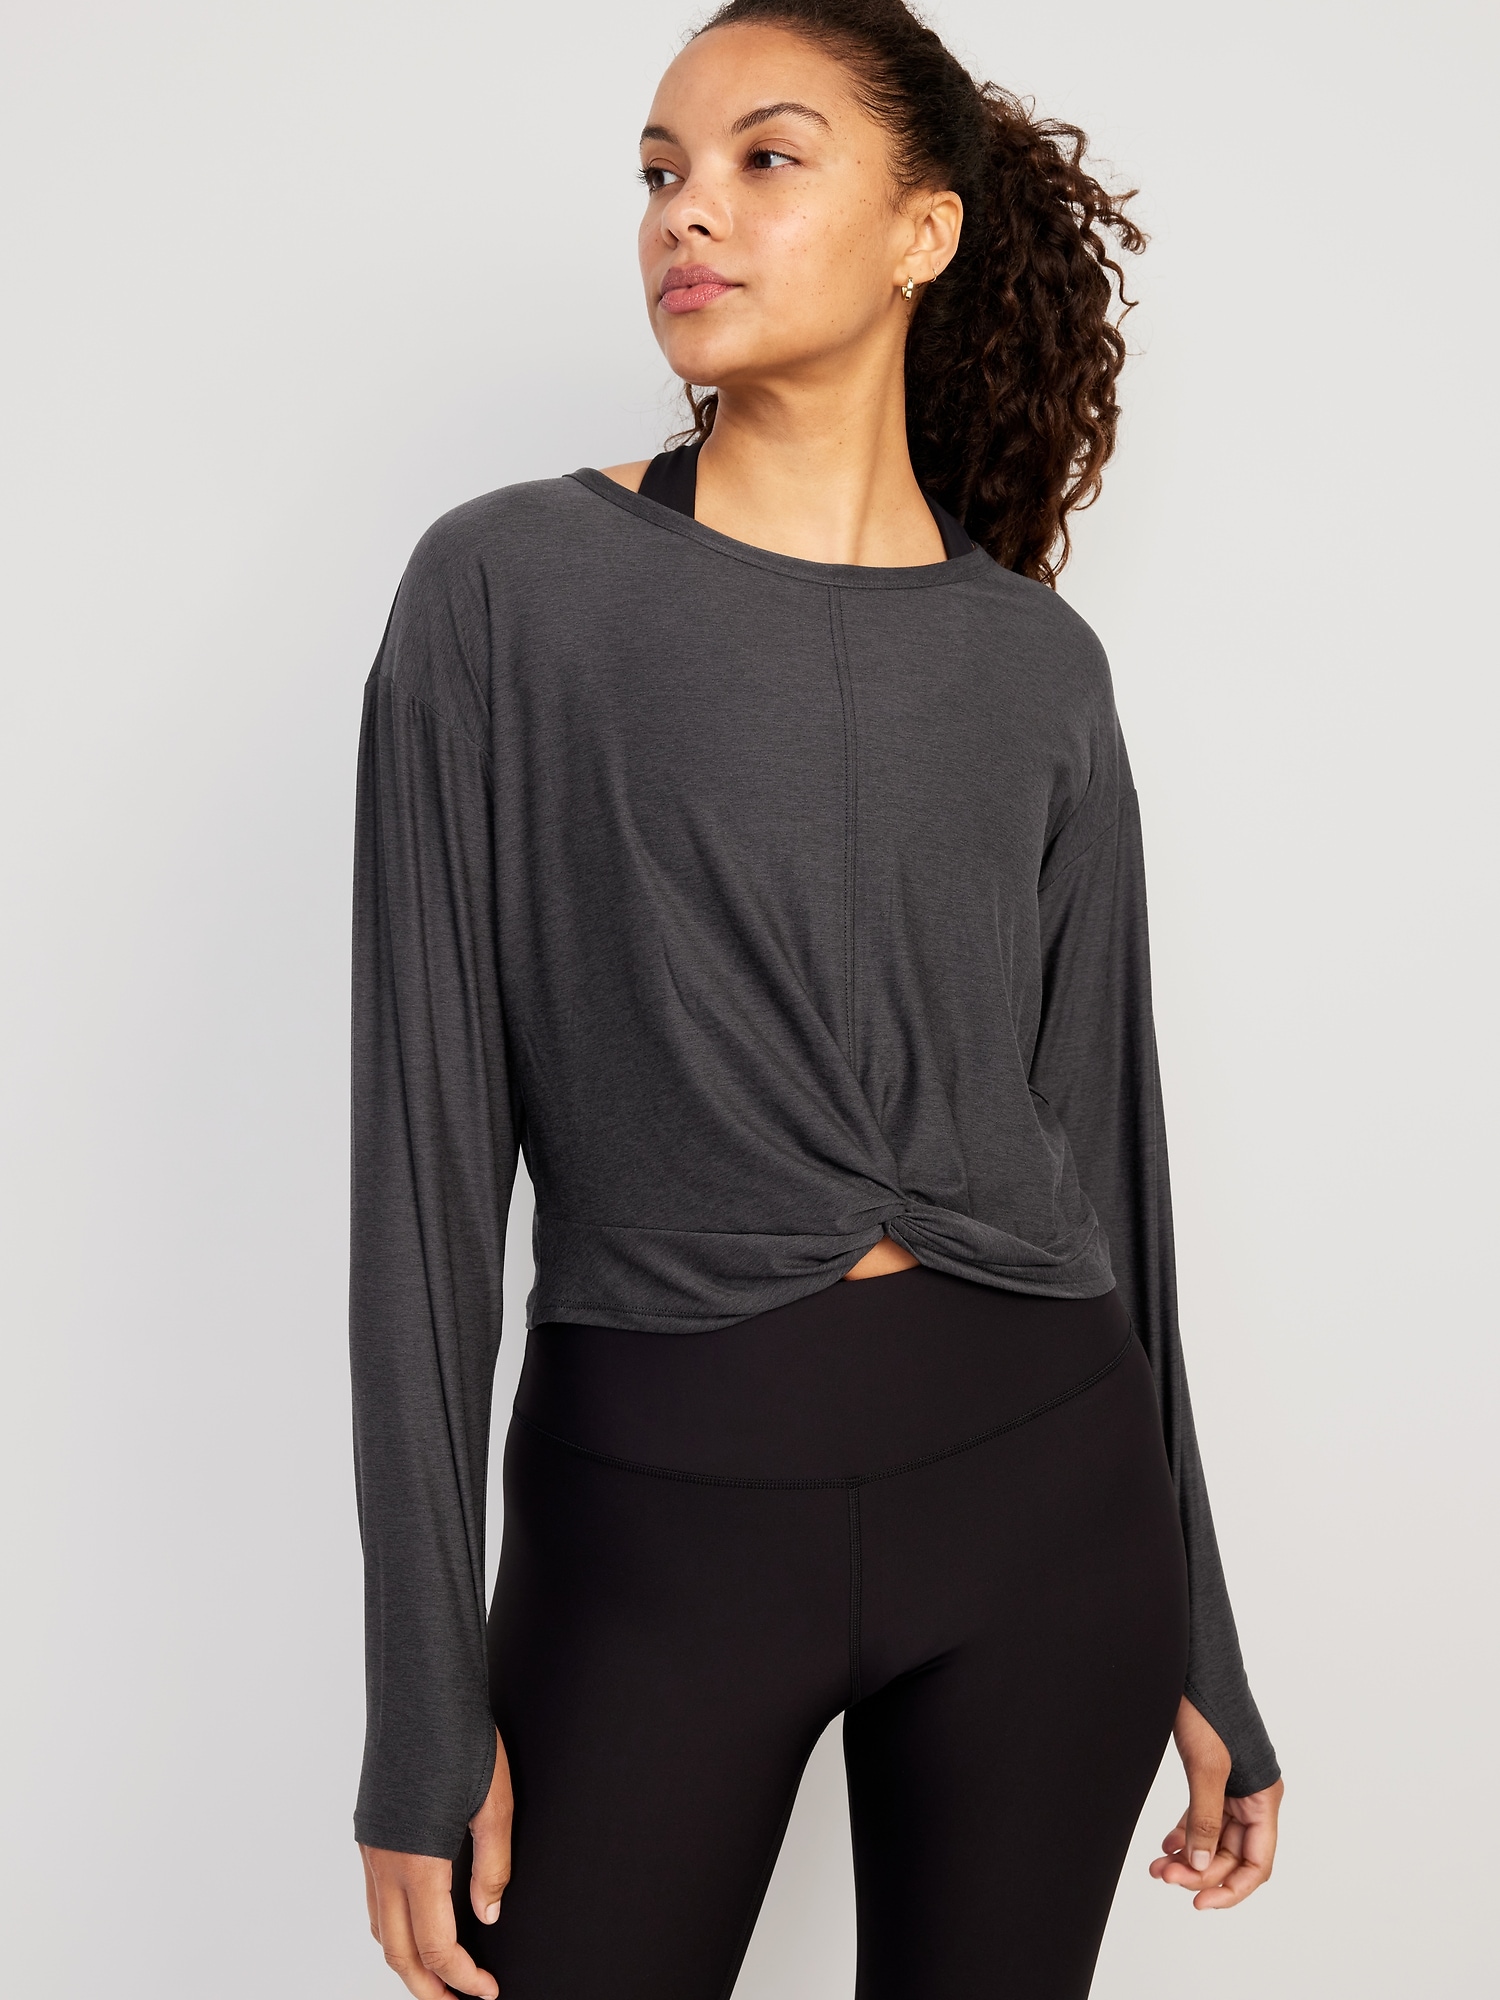 Cloud 94 Soft Long-Sleeve Twist-Front Top for Women | Old Navy